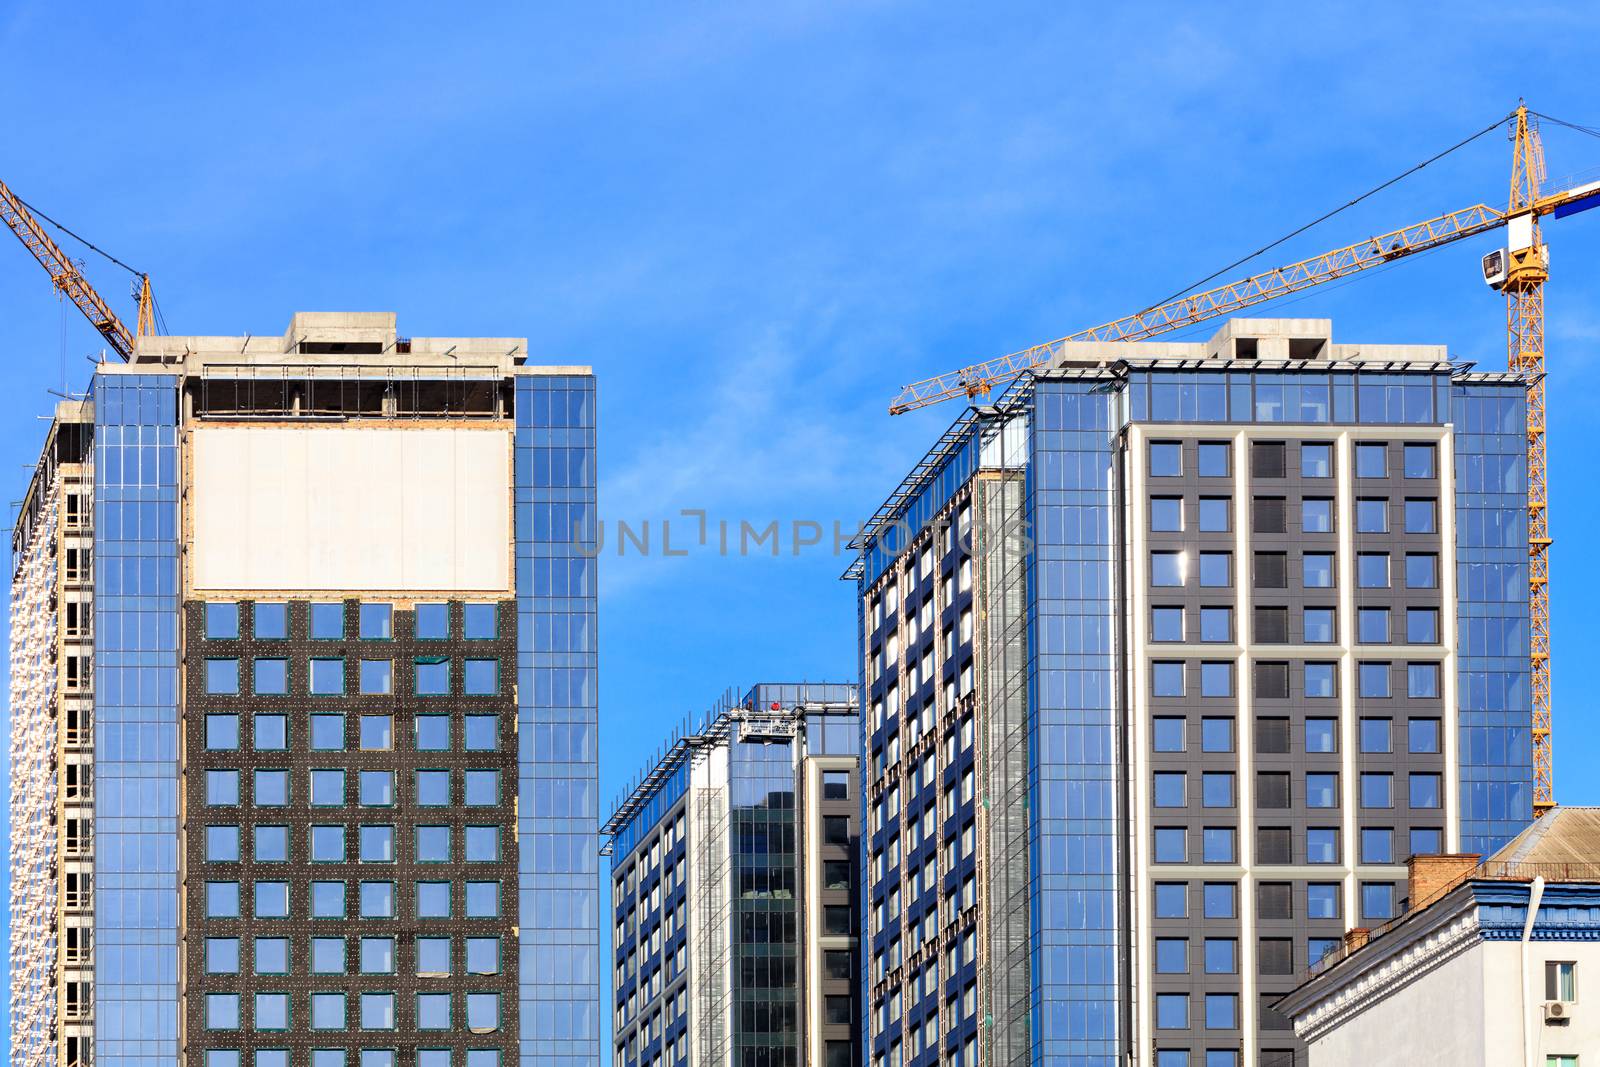 The glass facade, a reflection of the blue sky and crane near a modern concrete building under construction. by Sergii